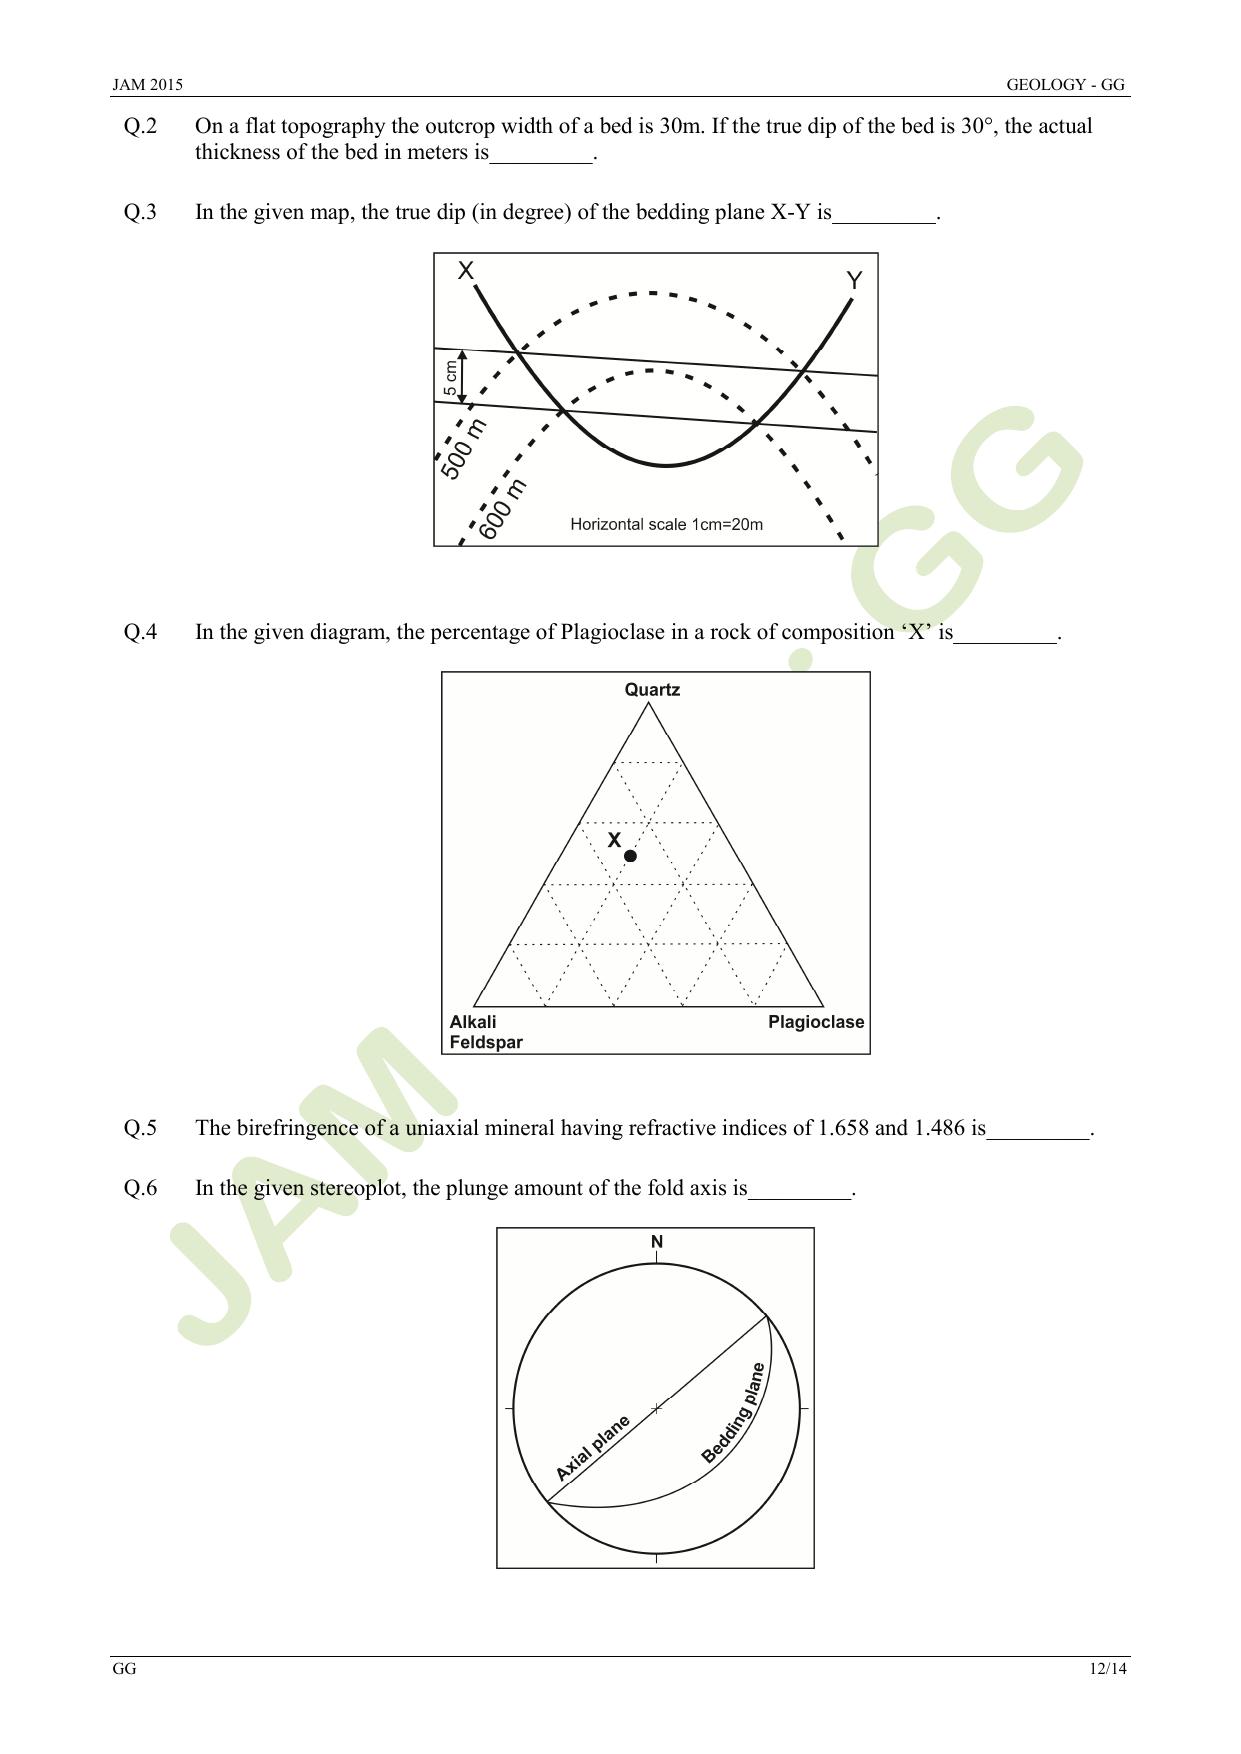 JAM 2015: GG Question Paper - Page 12